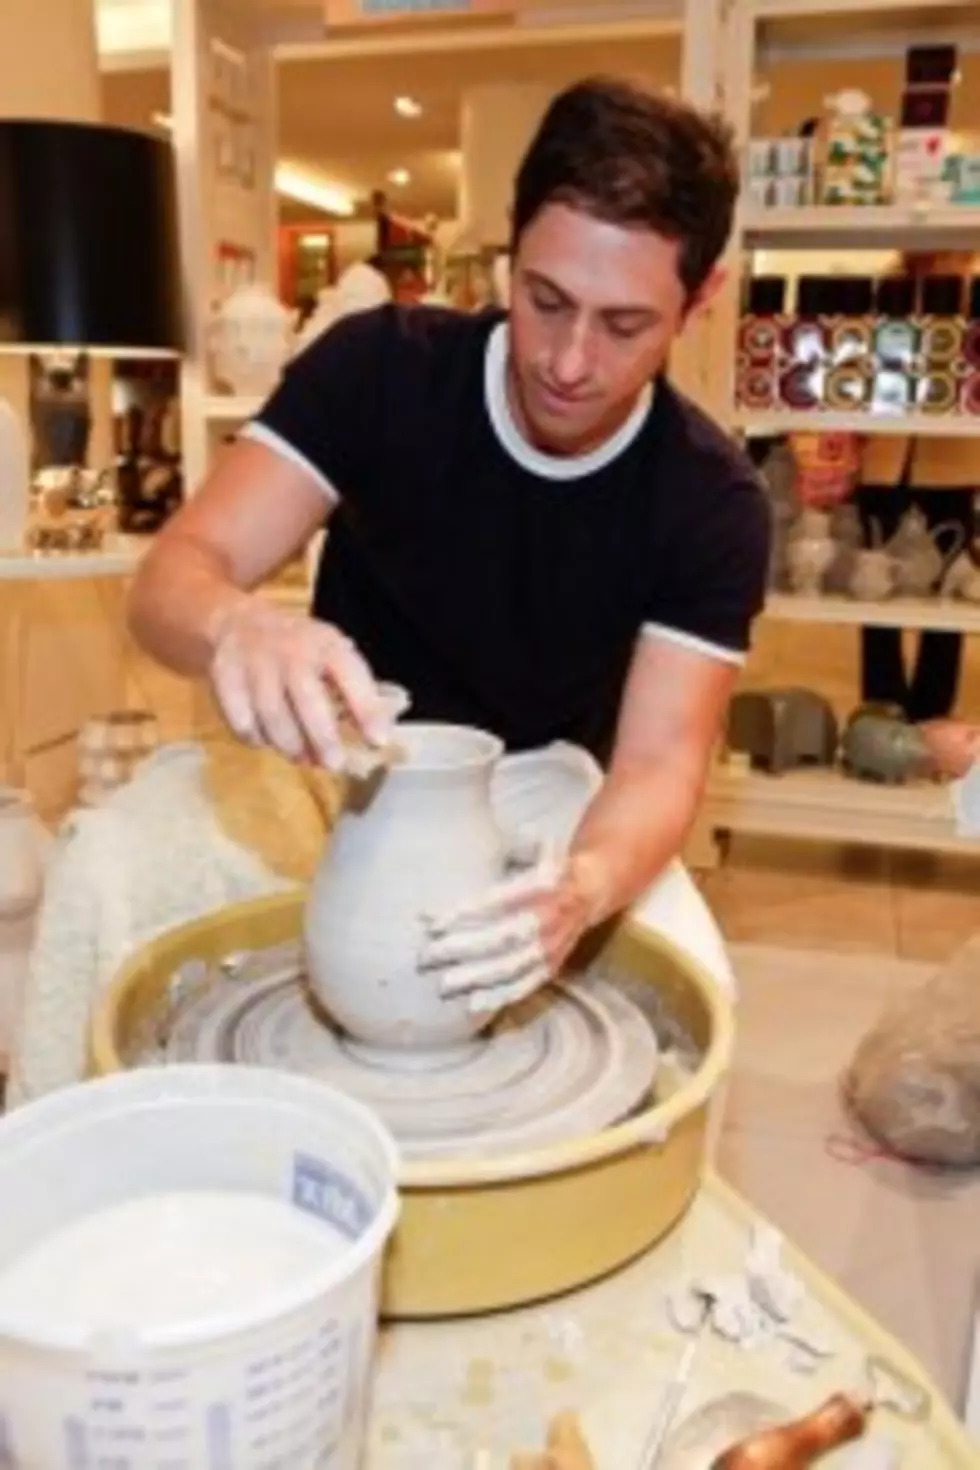 Local Pottery Makes Unique Christmas Gifts